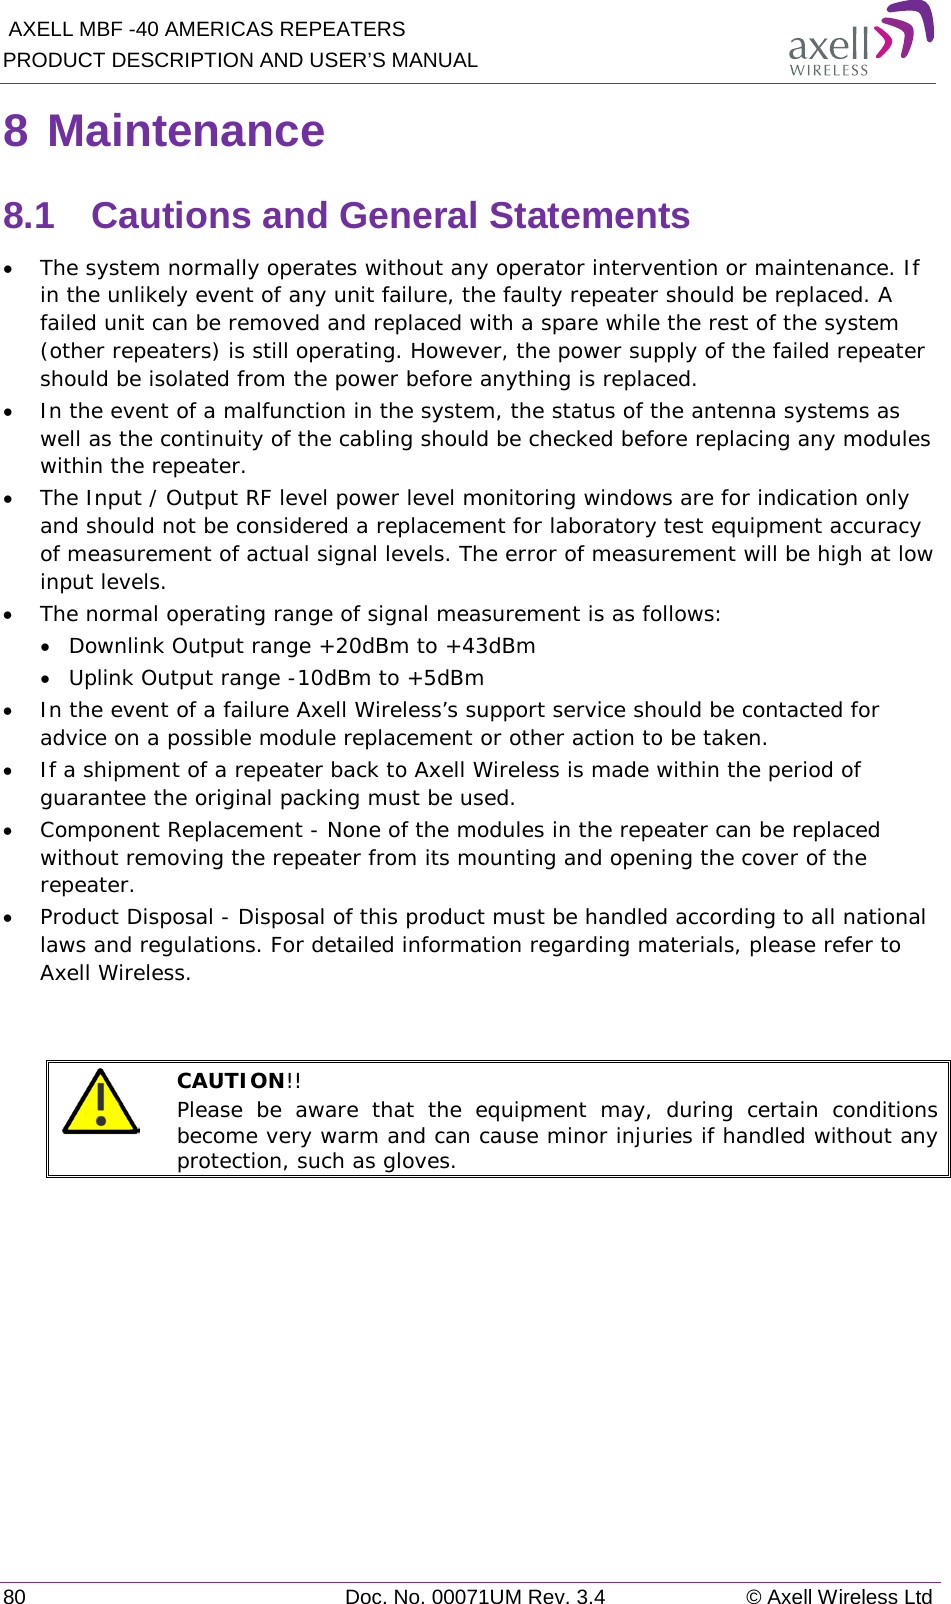  AXELL MBF -40 AMERICAS REPEATERS PRODUCT DESCRIPTION AND USER’S MANUAL 80 Doc. No. 00071UM Rev. 3.4 © Axell Wireless Ltd 8 Maintenance 8.1  Cautions and General Statements • The system normally operates without any operator intervention or maintenance. If in the unlikely event of any unit failure, the faulty repeater should be replaced. A failed unit can be removed and replaced with a spare while the rest of the system (other repeaters) is still operating. However, the power supply of the failed repeater should be isolated from the power before anything is replaced. • In the event of a malfunction in the system, the status of the antenna systems as well as the continuity of the cabling should be checked before replacing any modules within the repeater. • The Input / Output RF level power level monitoring windows are for indication only and should not be considered a replacement for laboratory test equipment accuracy of measurement of actual signal levels. The error of measurement will be high at low input levels. • The normal operating range of signal measurement is as follows: • Downlink Output range +20dBm to +43dBm • Uplink Output range -10dBm to +5dBm • In the event of a failure Axell Wireless’s support service should be contacted for advice on a possible module replacement or other action to be taken. • If a shipment of a repeater back to Axell Wireless is made within the period of guarantee the original packing must be used. • Component Replacement - None of the modules in the repeater can be replaced without removing the repeater from its mounting and opening the cover of the repeater.  • Product Disposal - Disposal of this product must be handled according to all national laws and regulations. For detailed information regarding materials, please refer to Axell Wireless.    CAUTION!!  Please be aware that the equipment may, during certain conditions become very warm and can cause minor injuries if handled without any protection, such as gloves.    